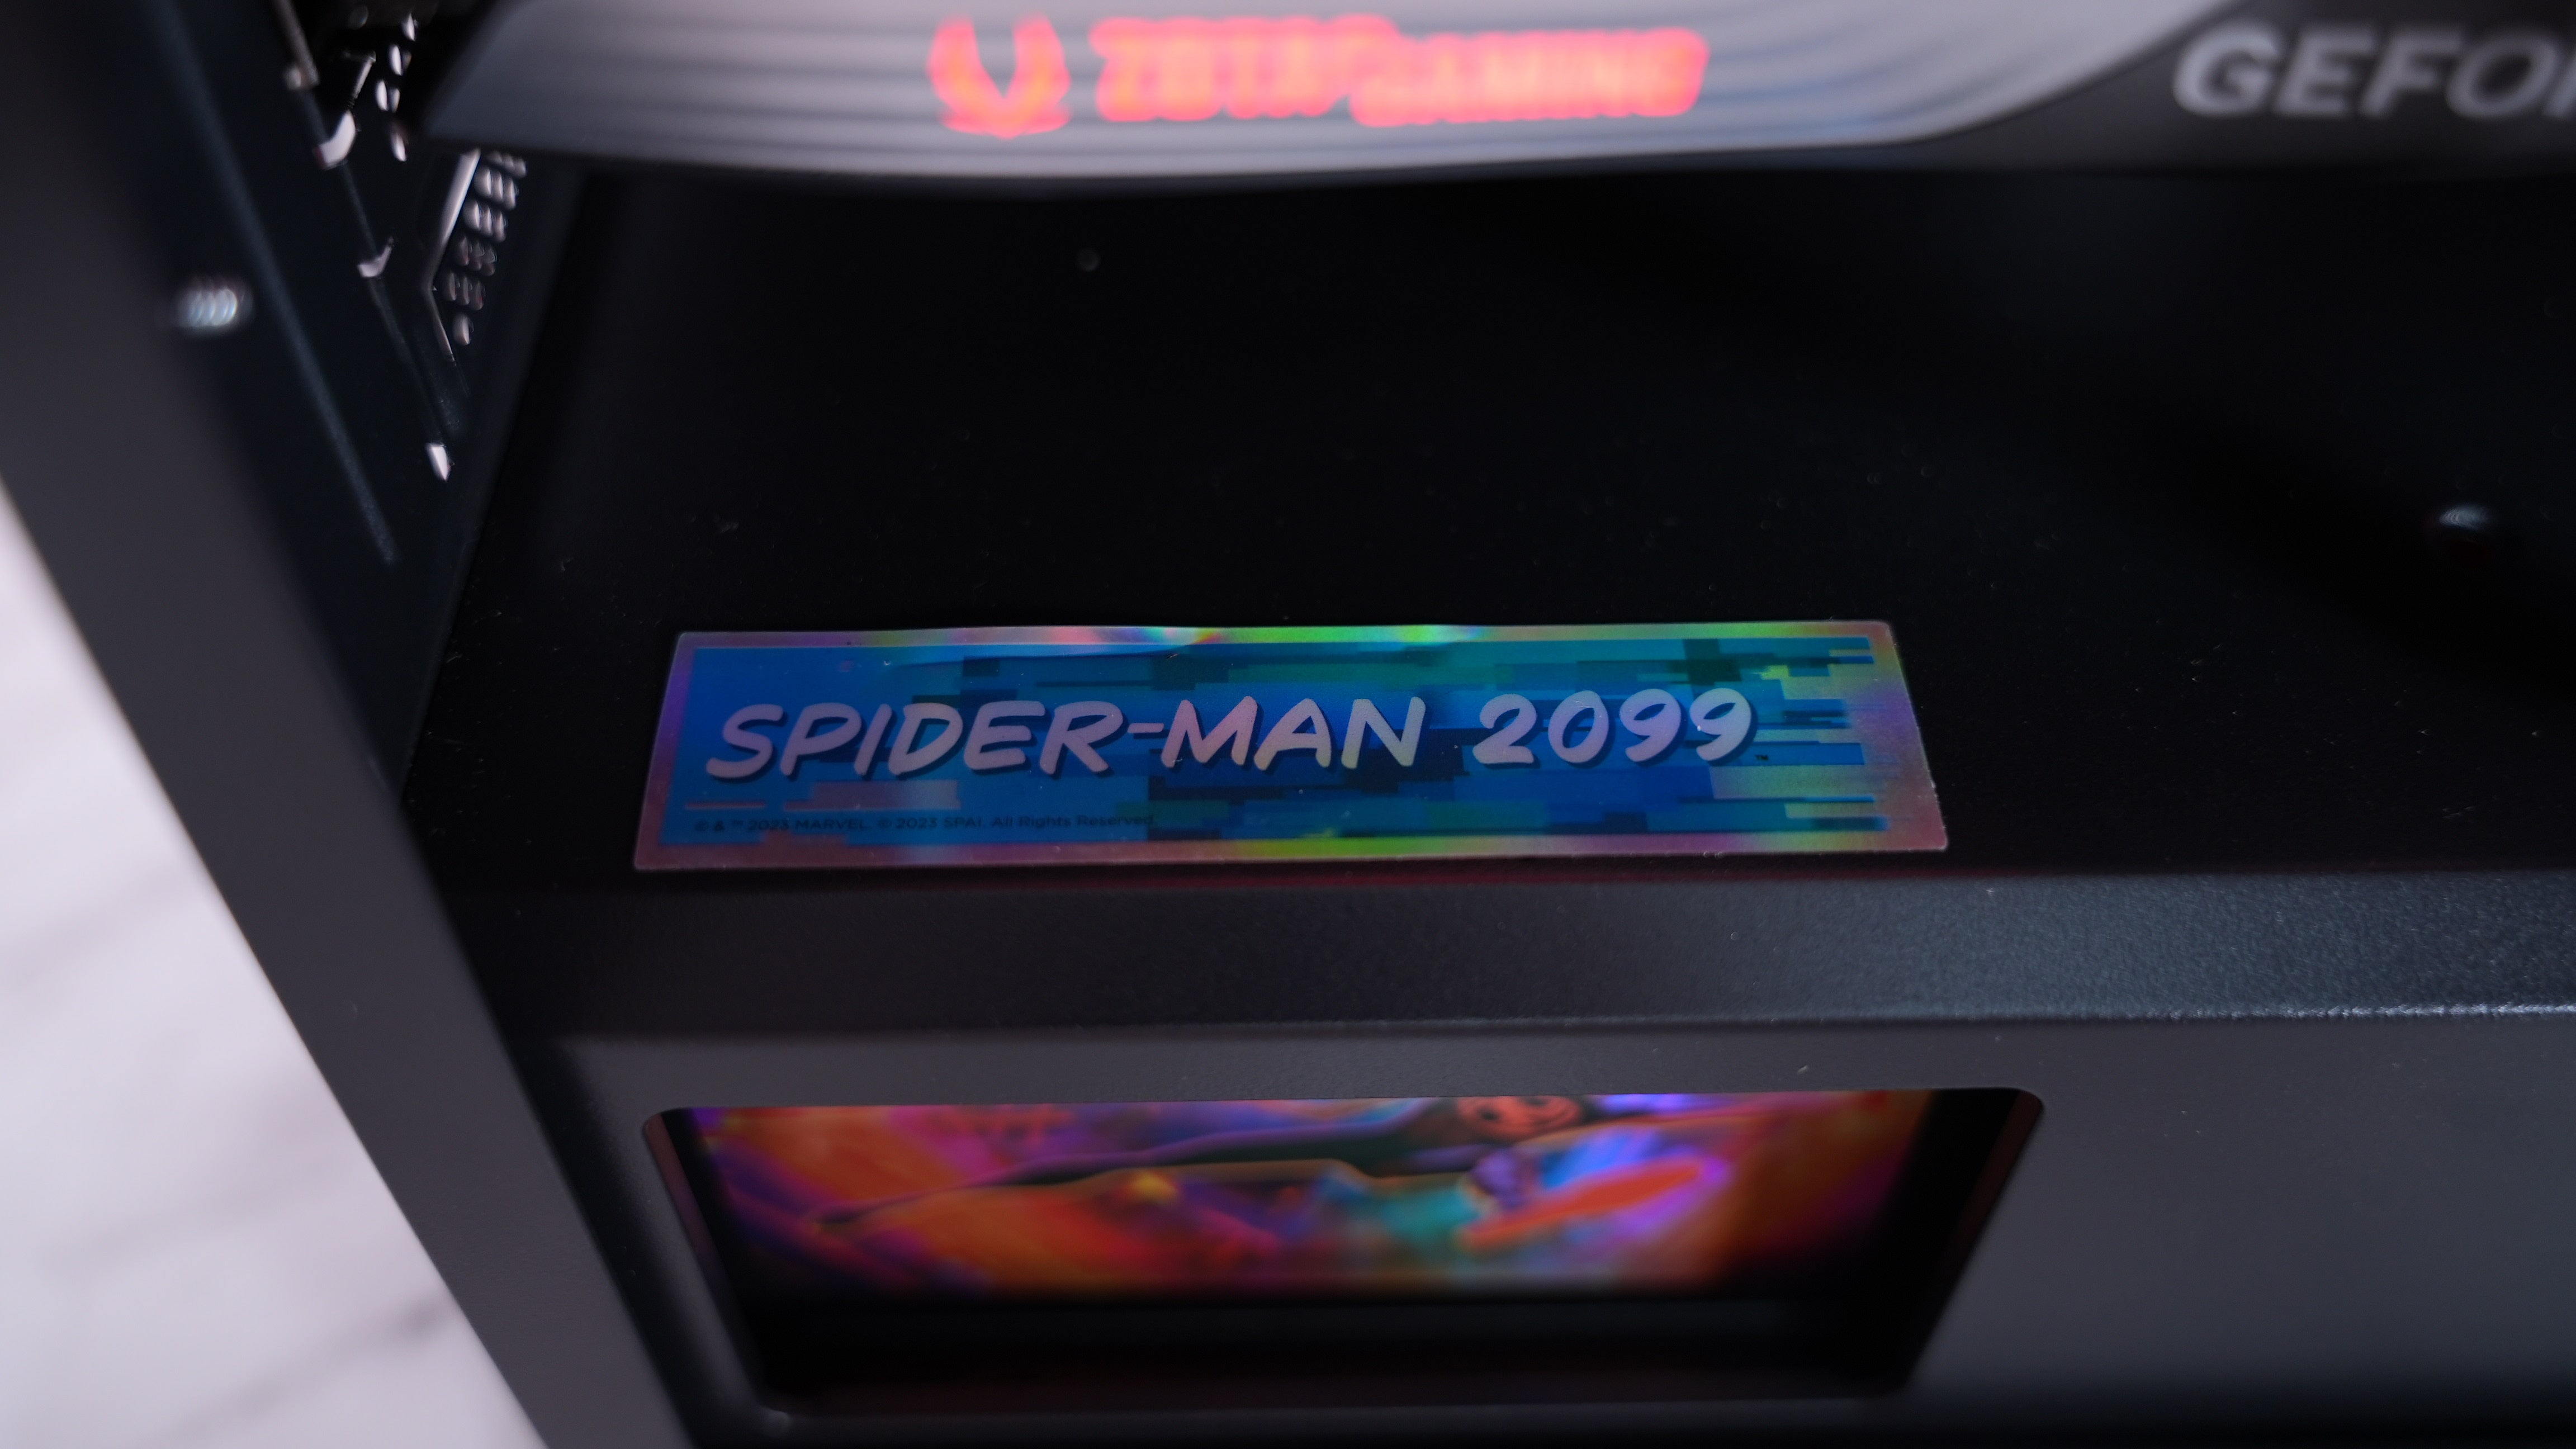 Intel i5 13600KF + RTX 4070 - Spider-Man Gaming/Streaming PC (In Stock)